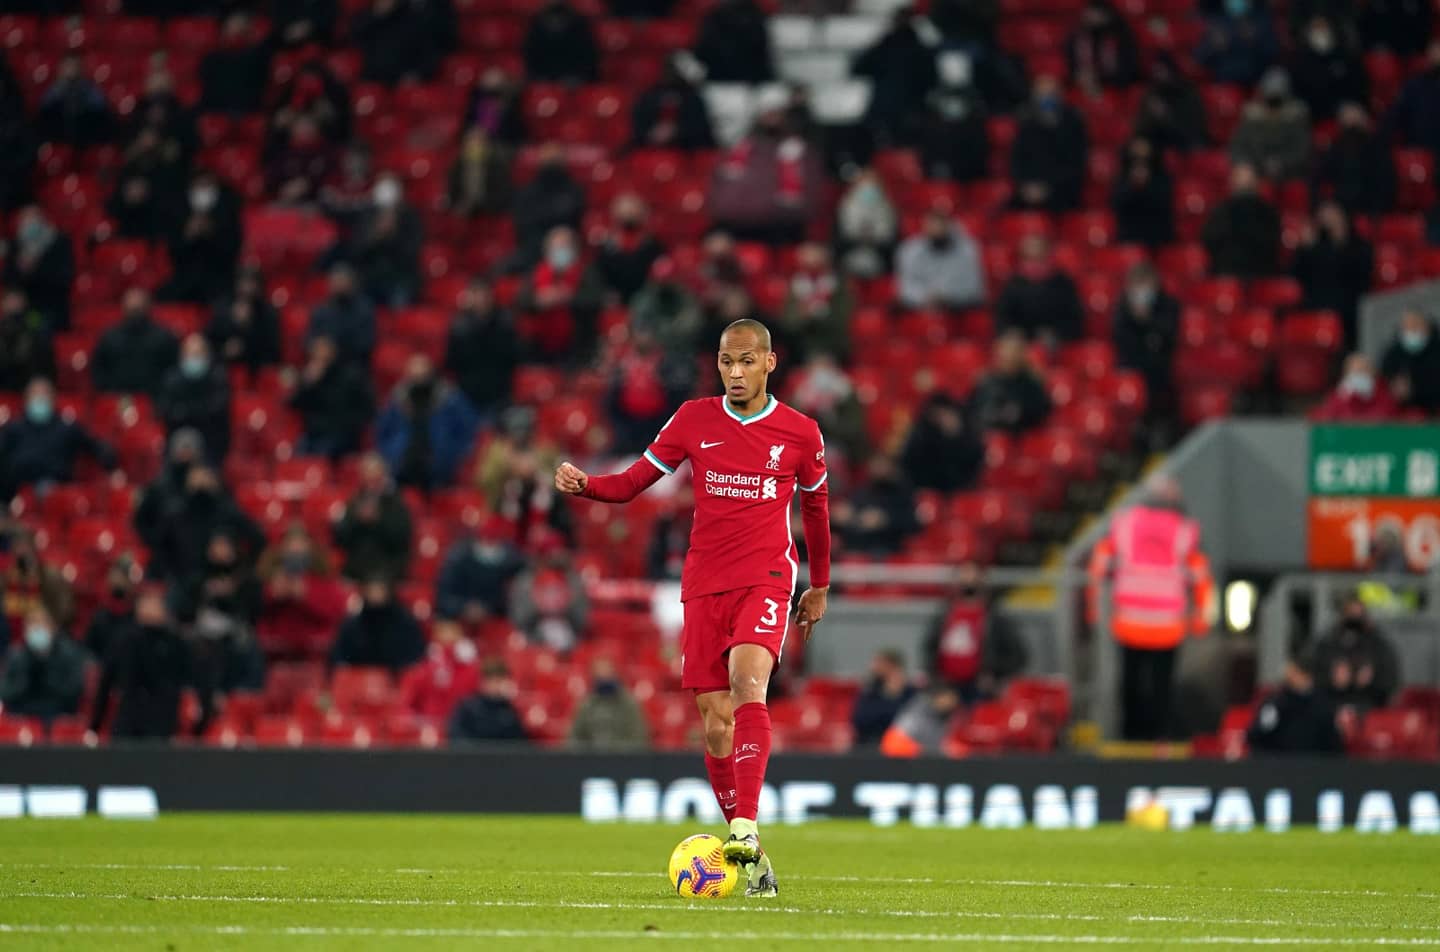 Losing Sadio Mane is big loss but now other players have to step up, asserts Fabinho